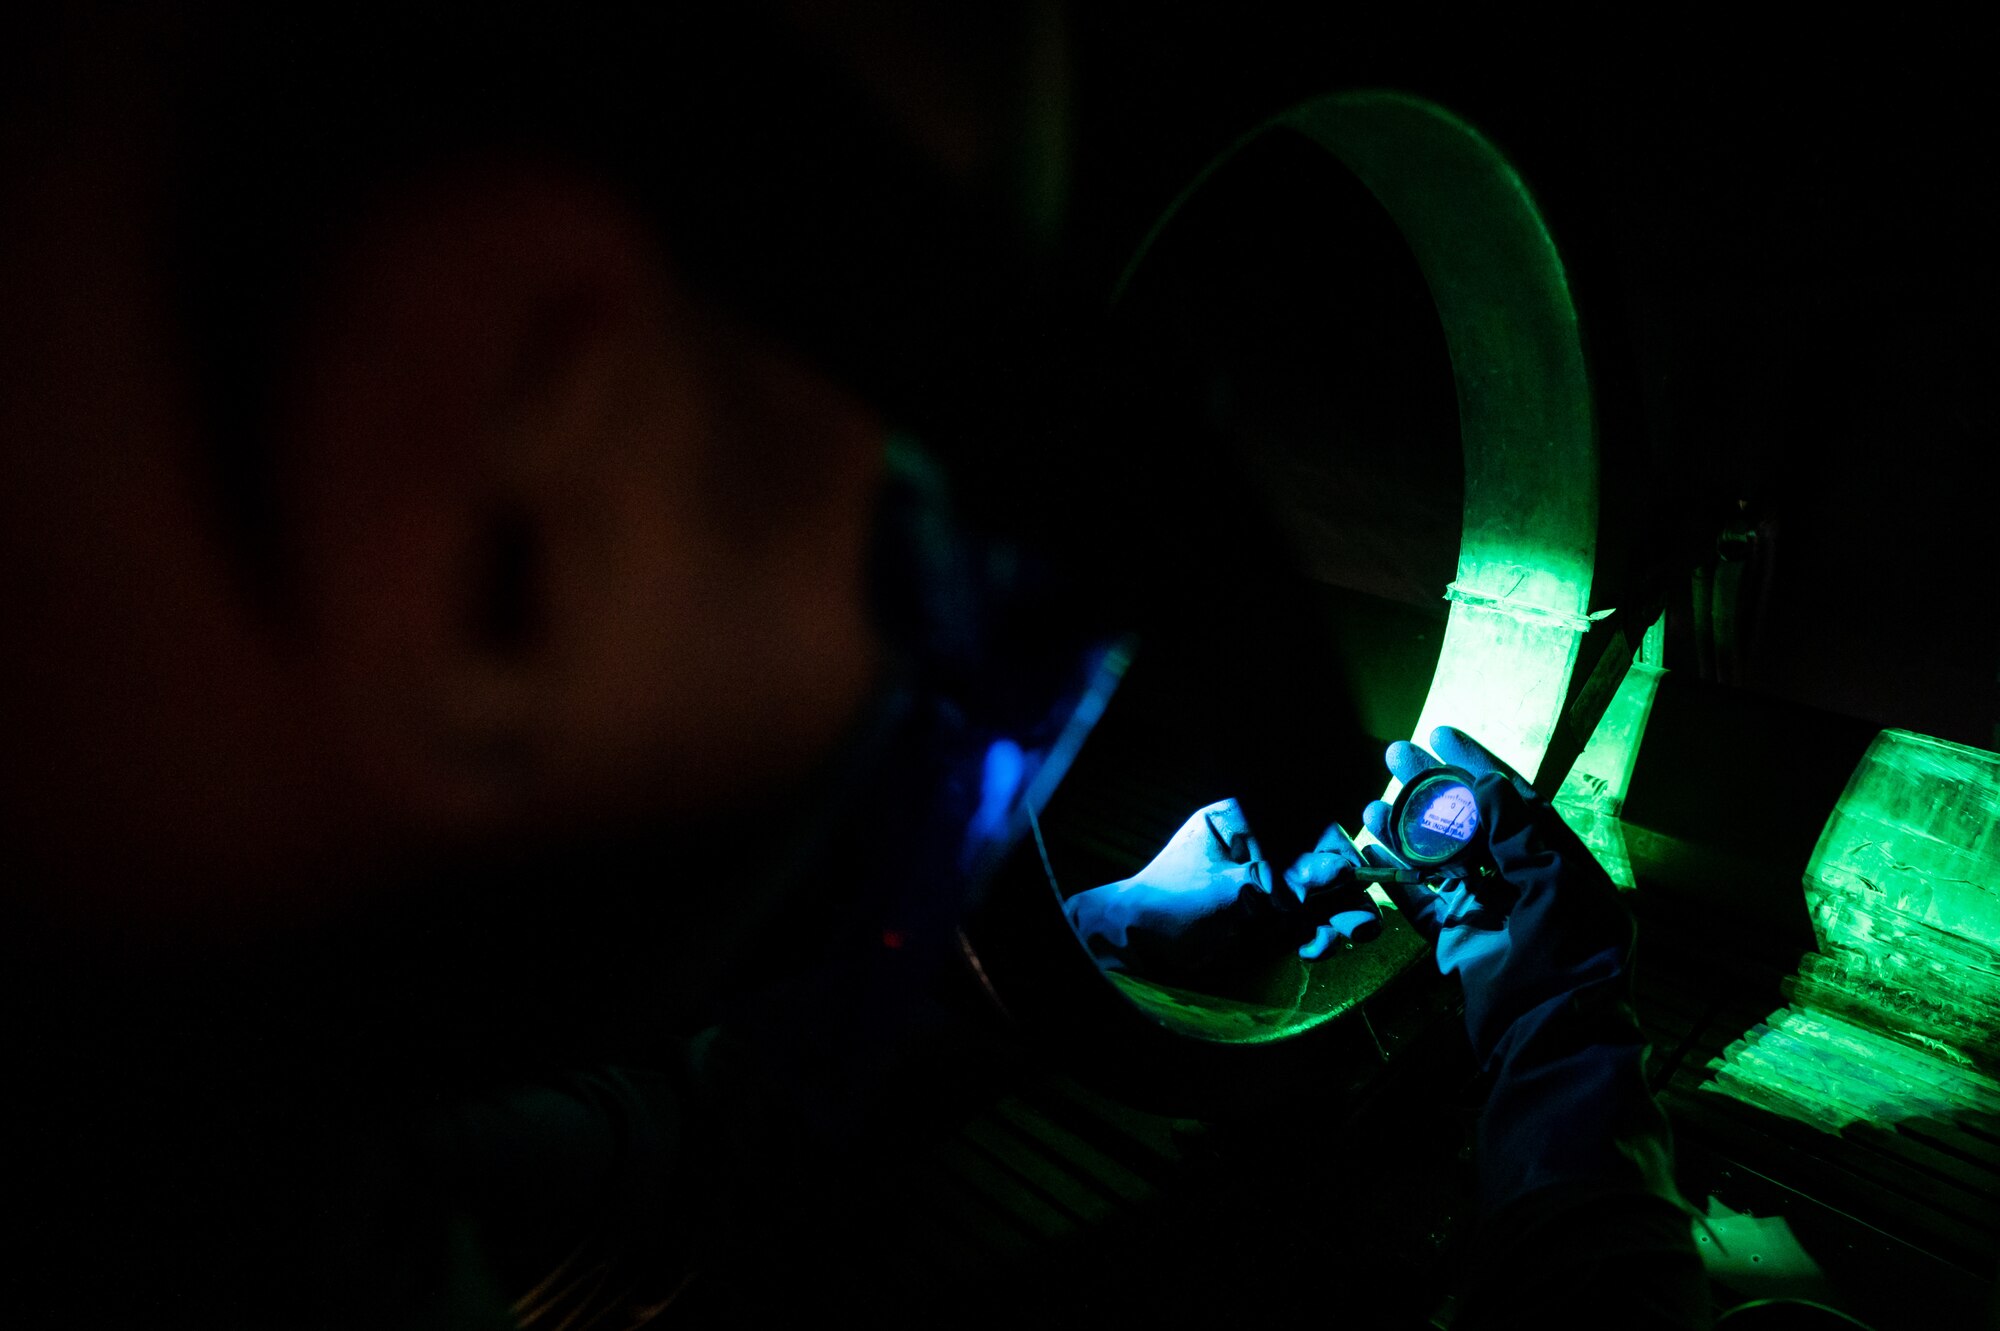 Senior Airman Mario Gomez measures the magnetization of an item during an inspection.